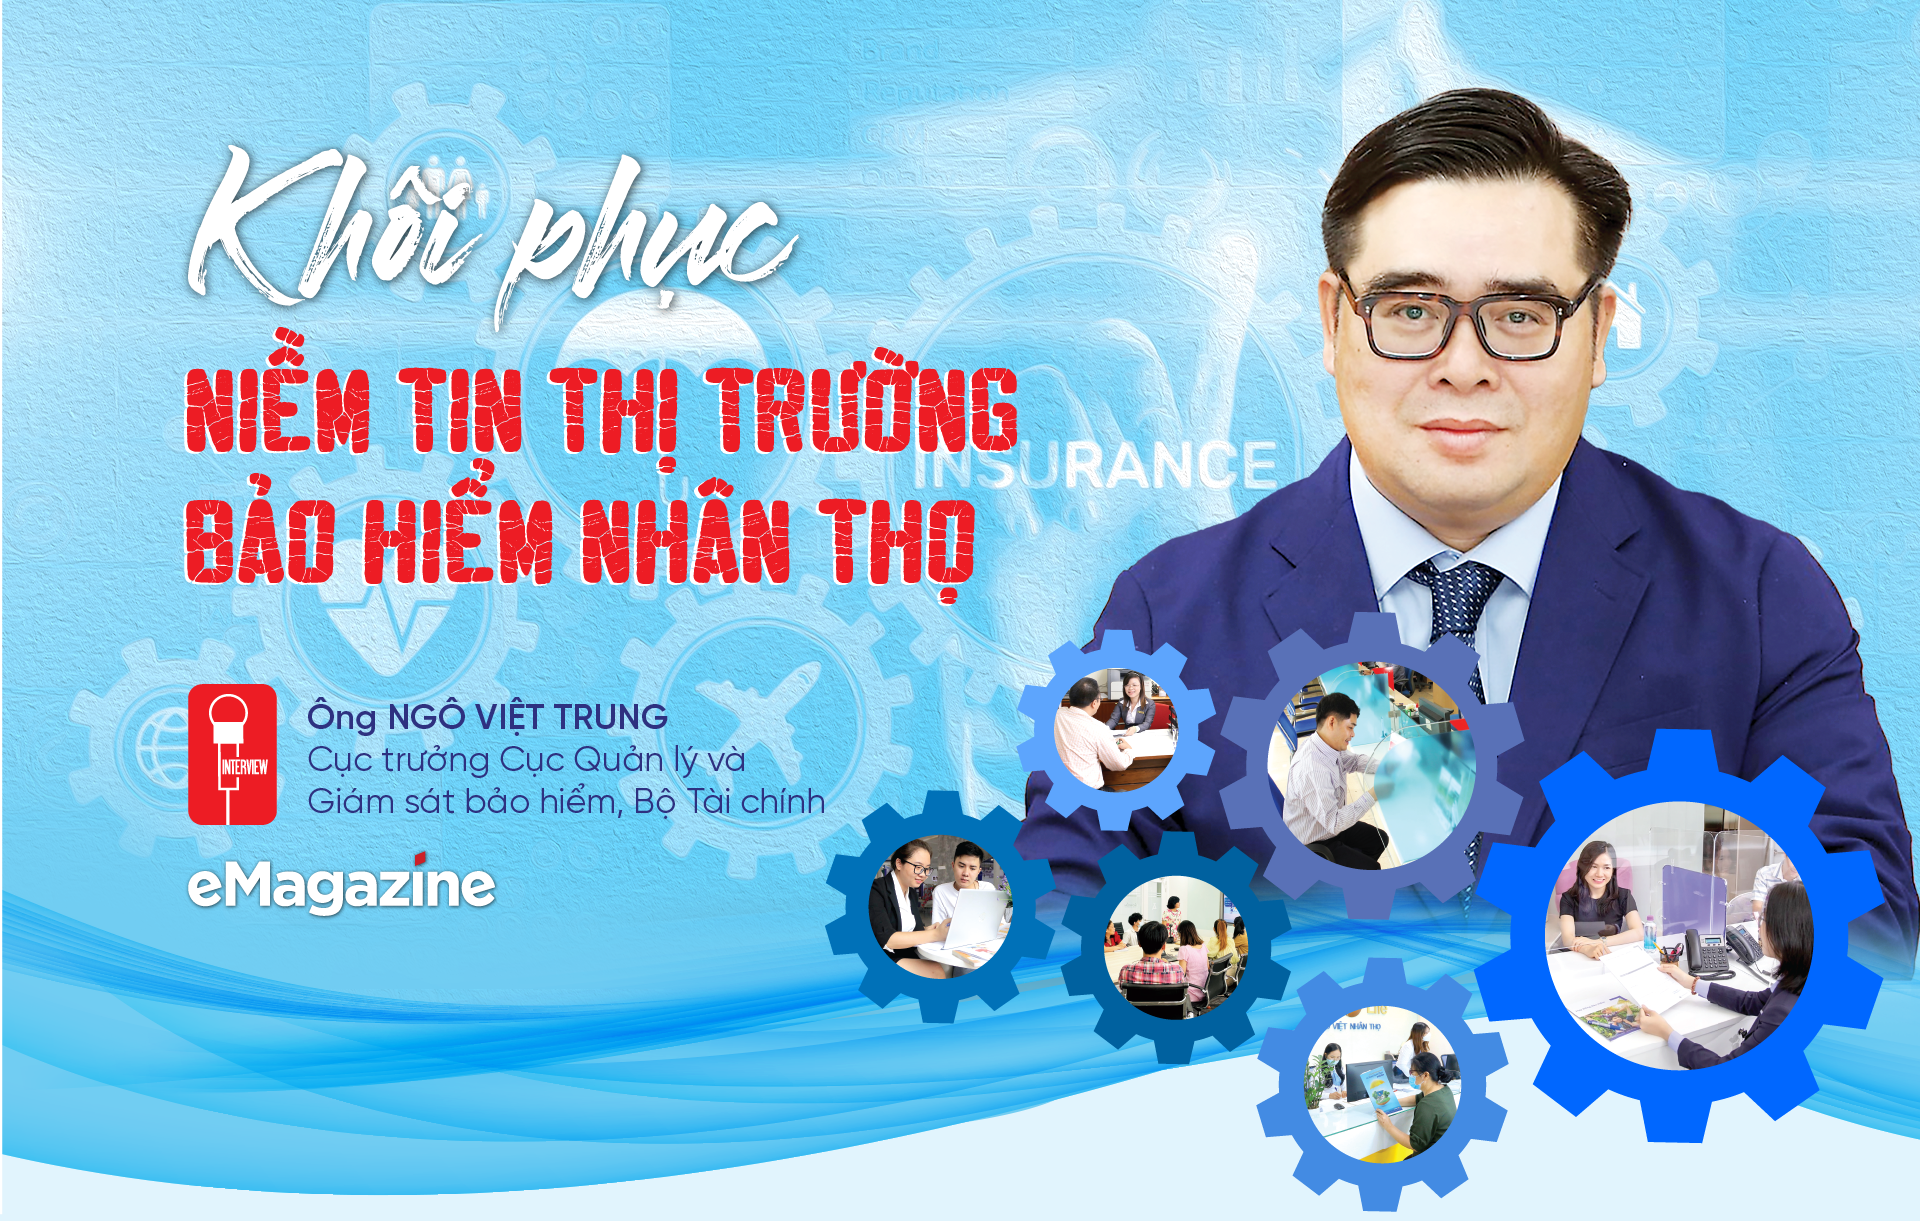 pv-ngo-viet-trung-emag-01.png